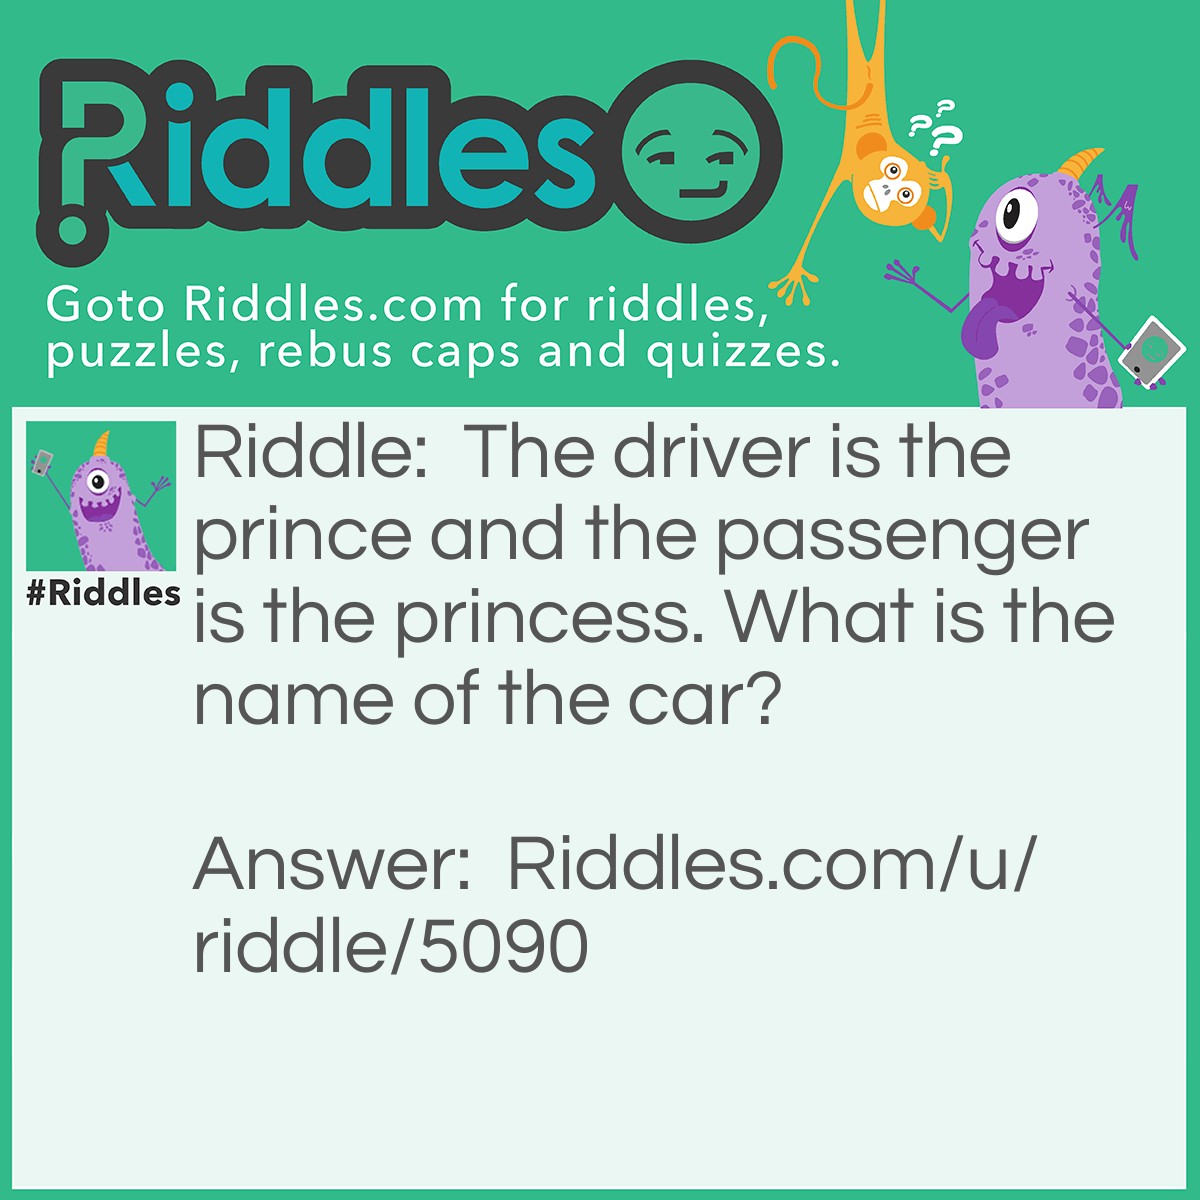 Riddle: The driver is the prince and the passenger is the princess. What is the name of the car? Answer: The car is called "what".